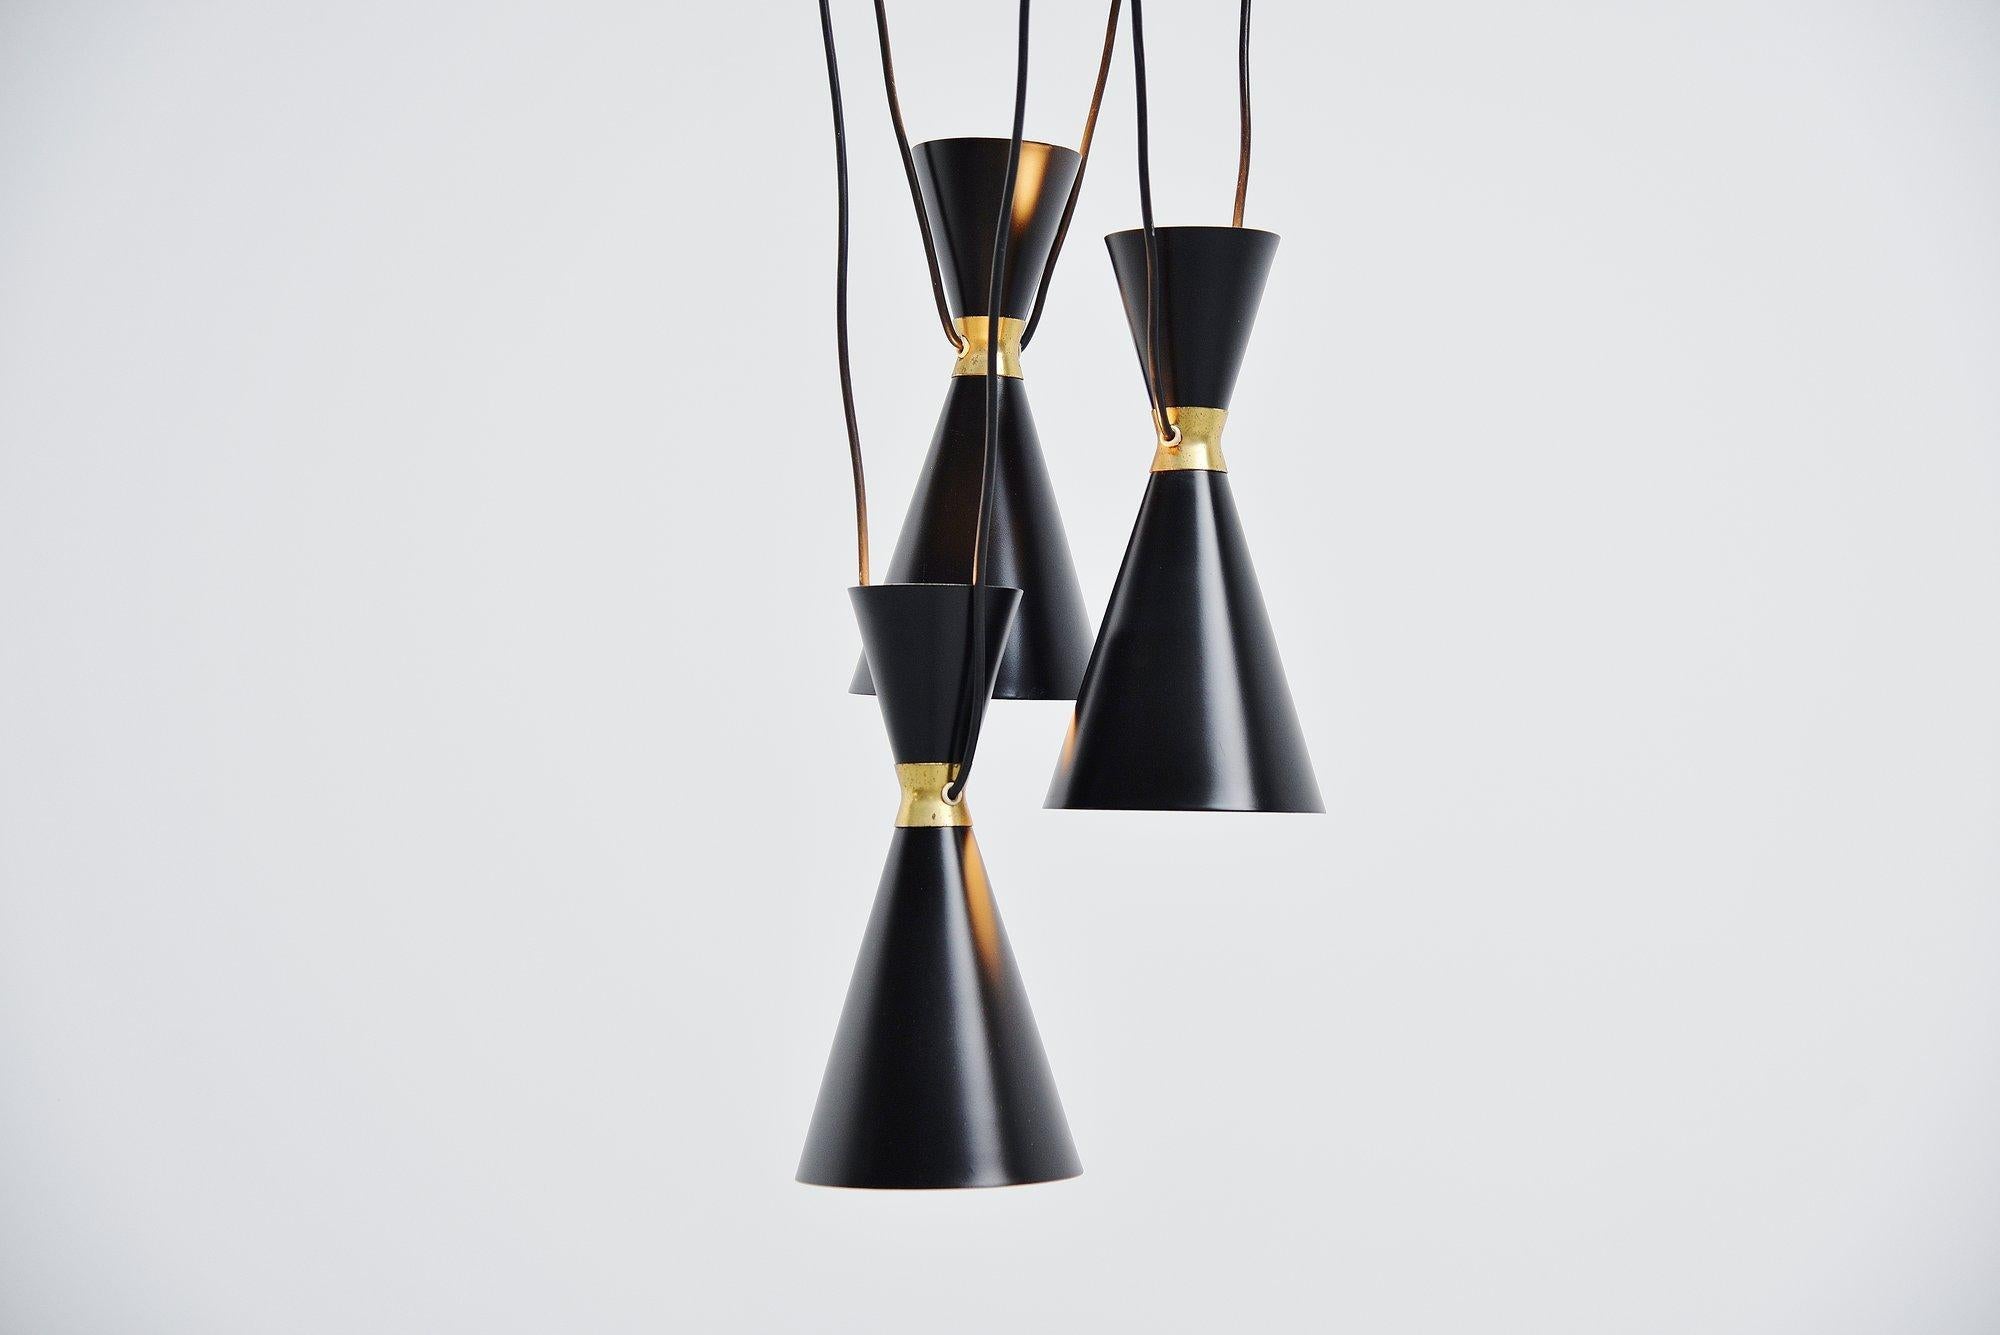 Very nice spectacular 3 shades chandelier by Stilnovo, Italy 1950. This chandelier has 3 diabolo shaped shades. There are 2 sockets per shade so the lamp lits up and down. The round black ceiling plate is not included with this lamp, the canopies